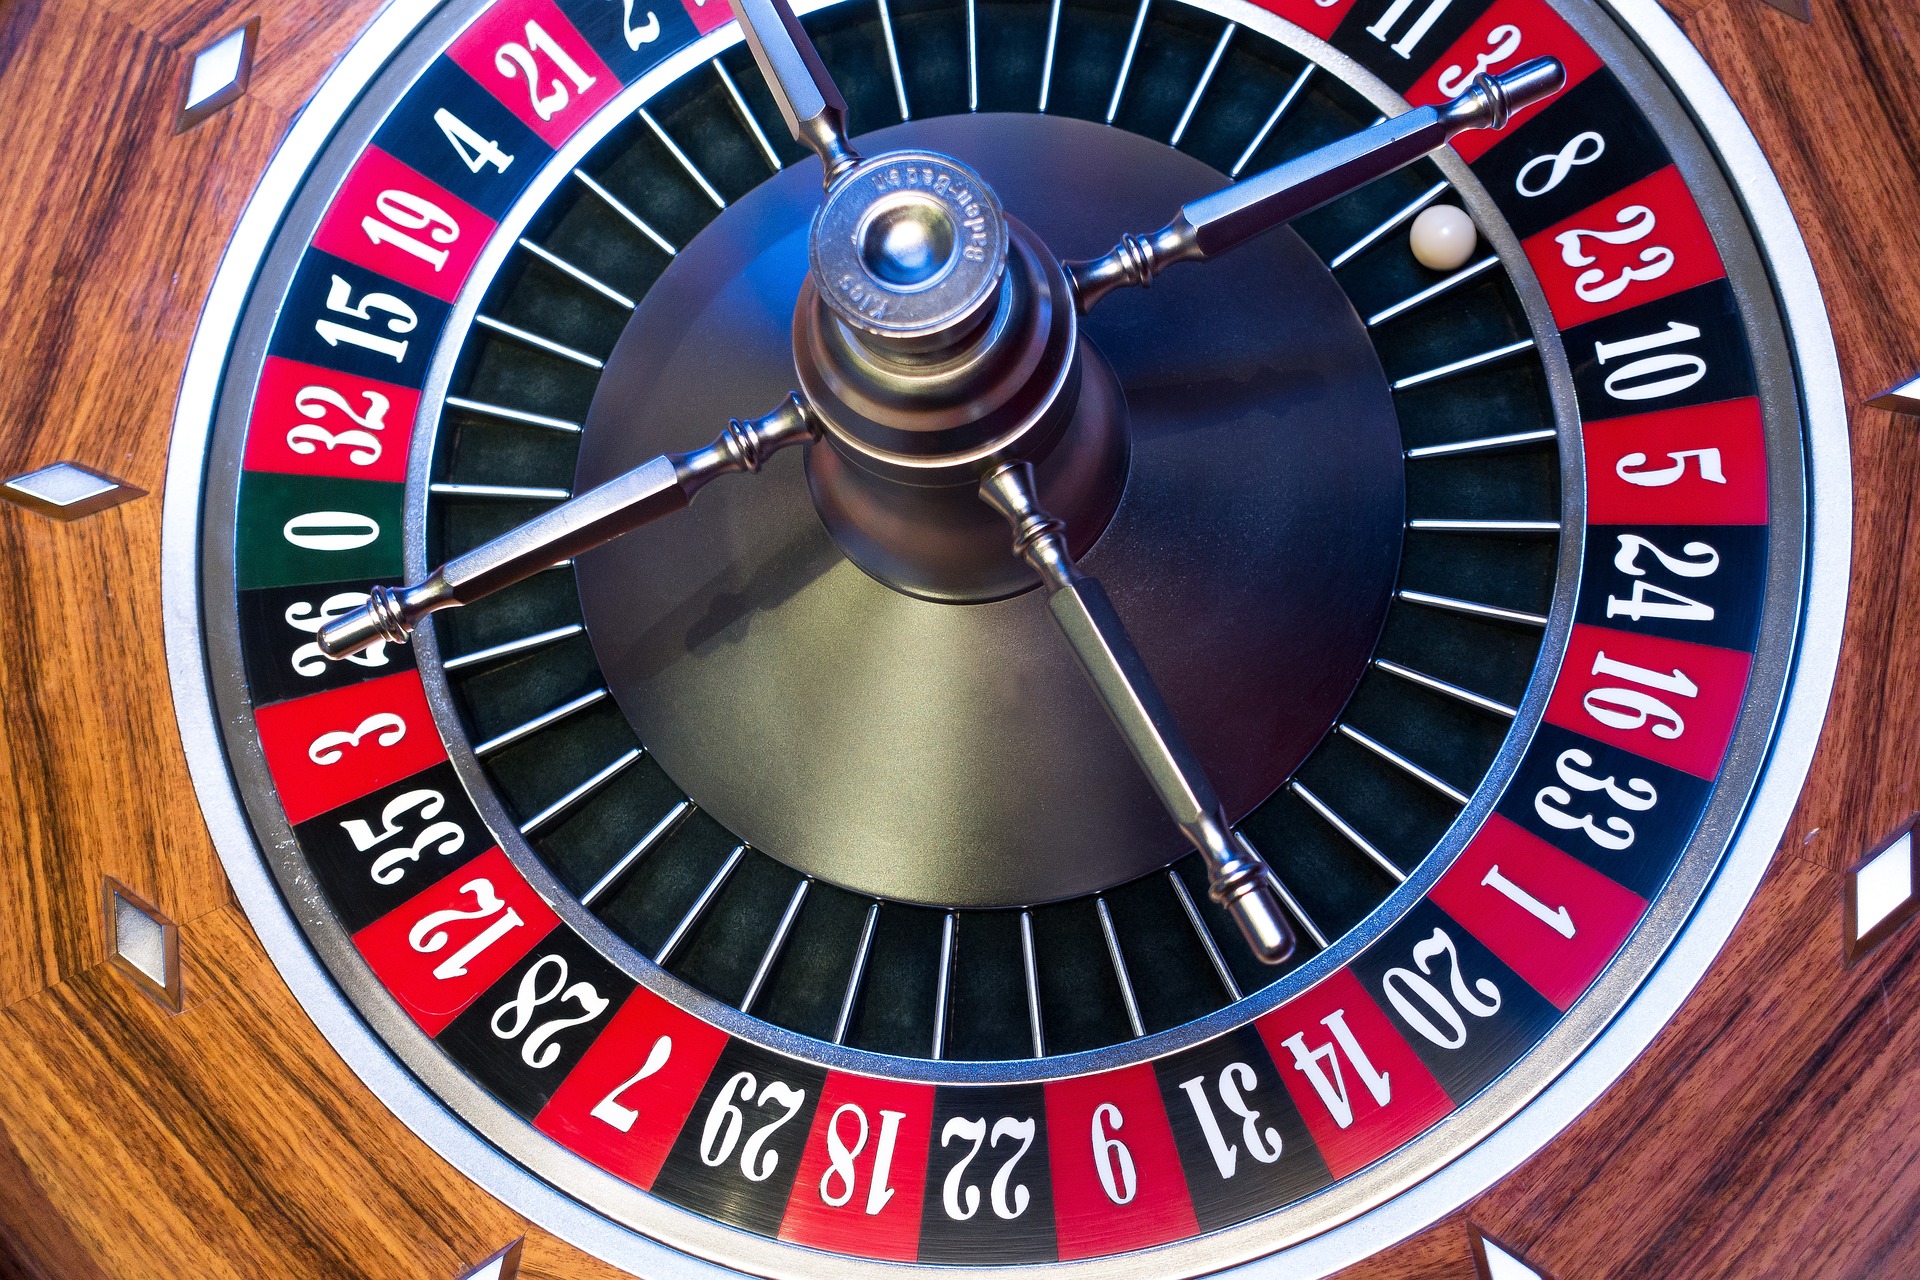 Roulette wheel with the ball having landed